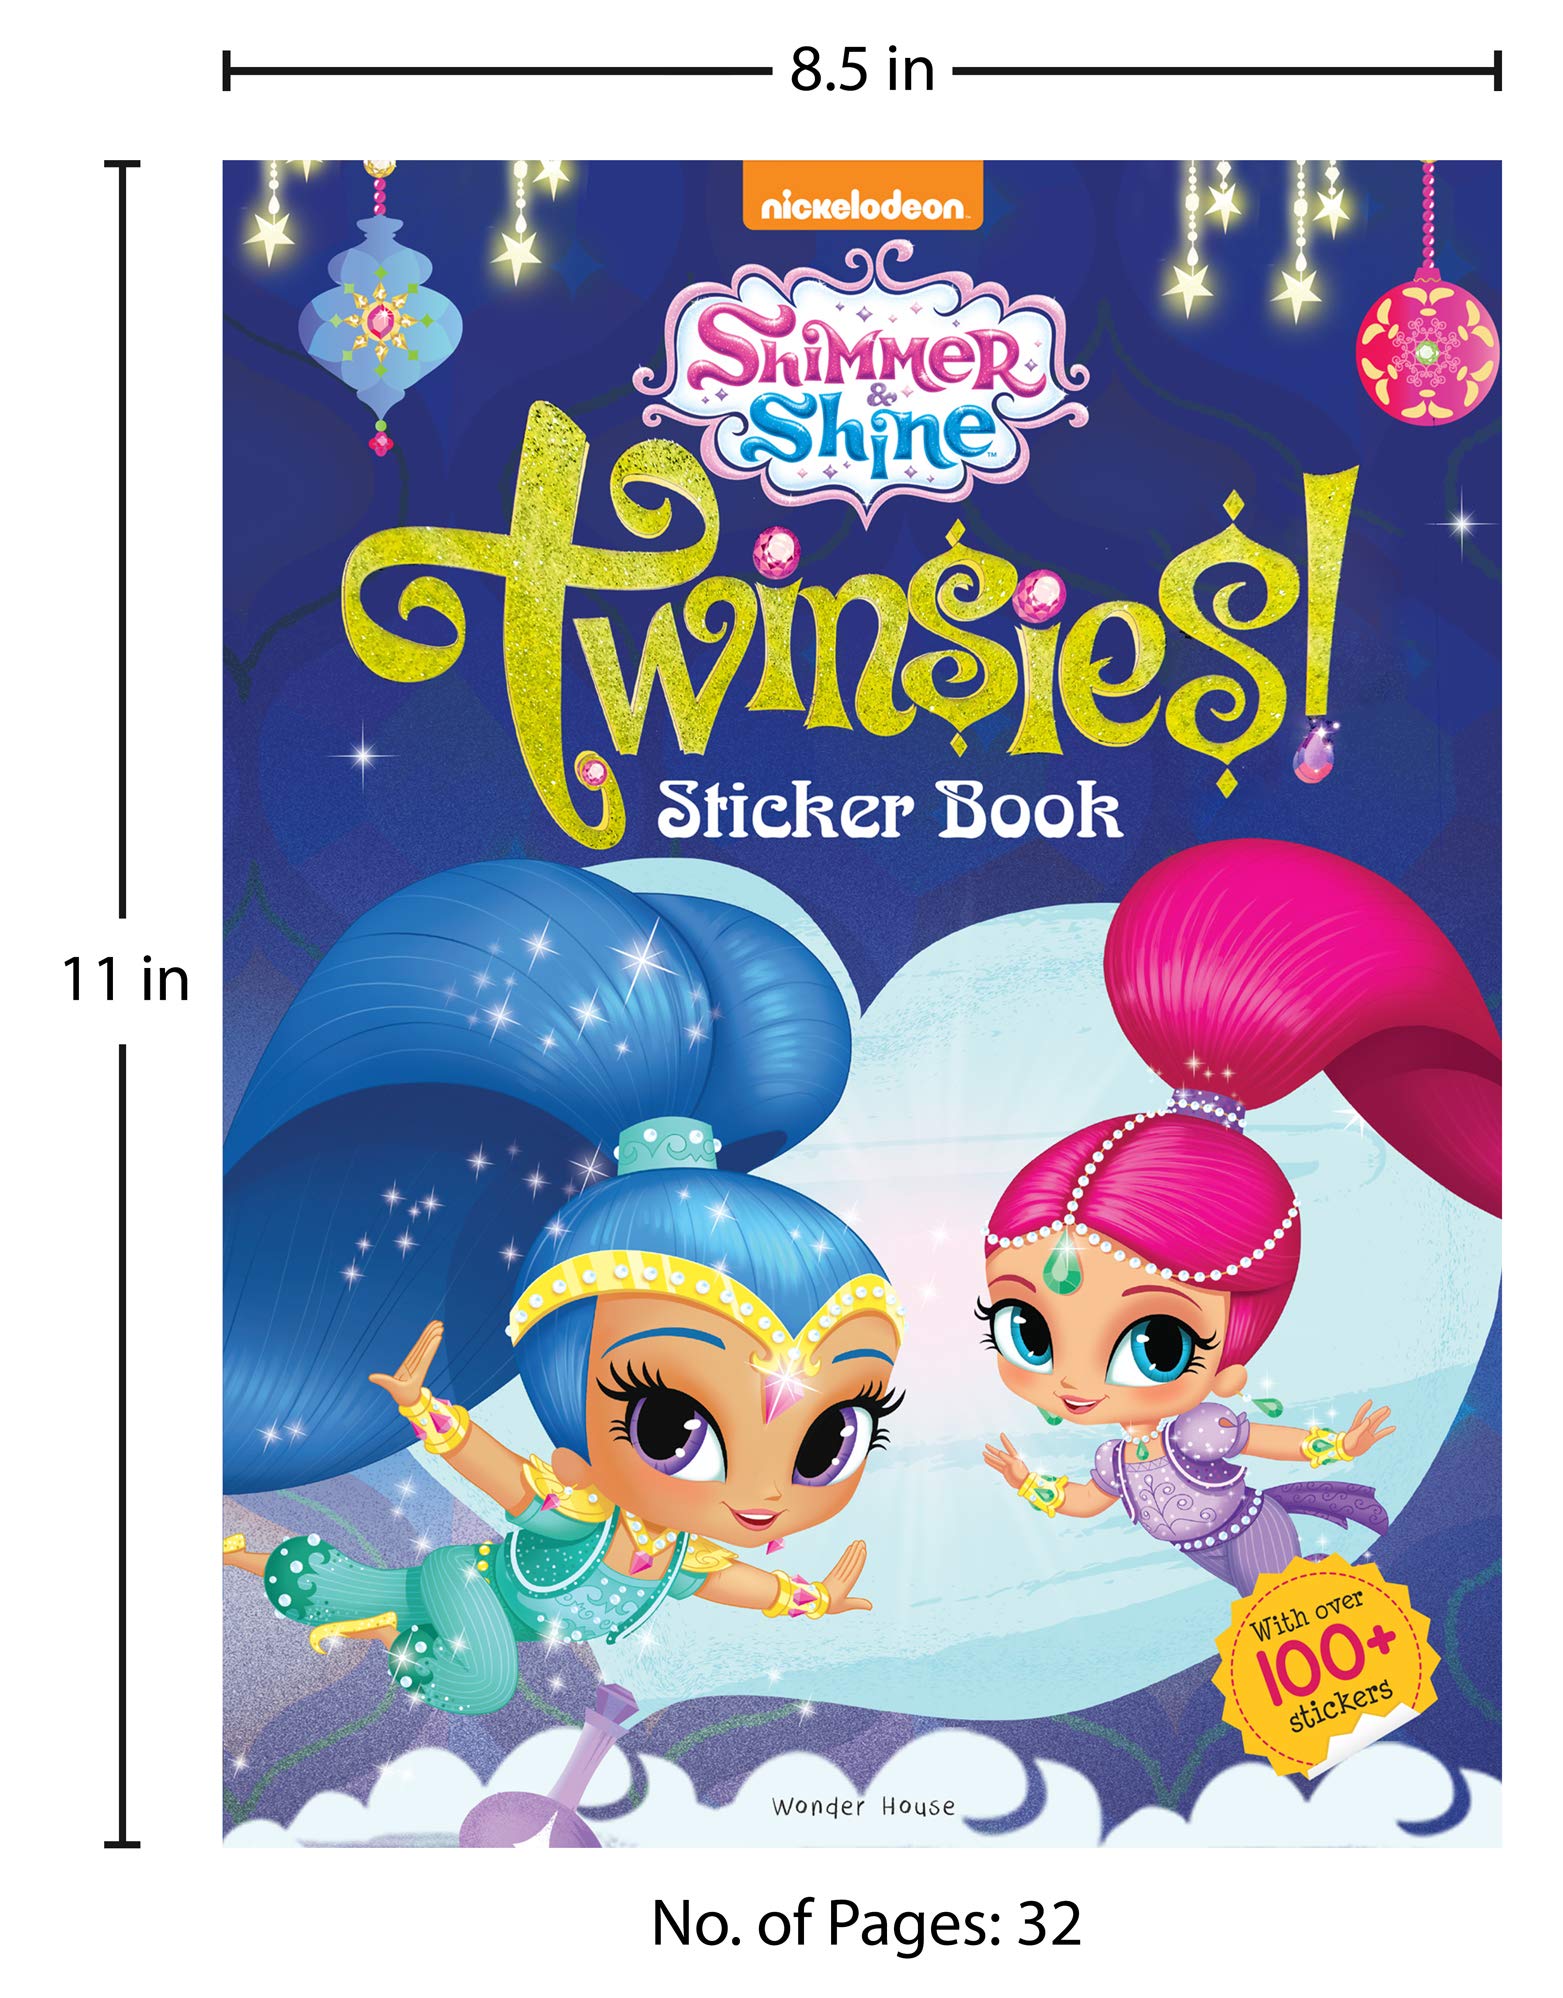 Twinsies - Sticker Book For Kids (Shimmer And Shine)